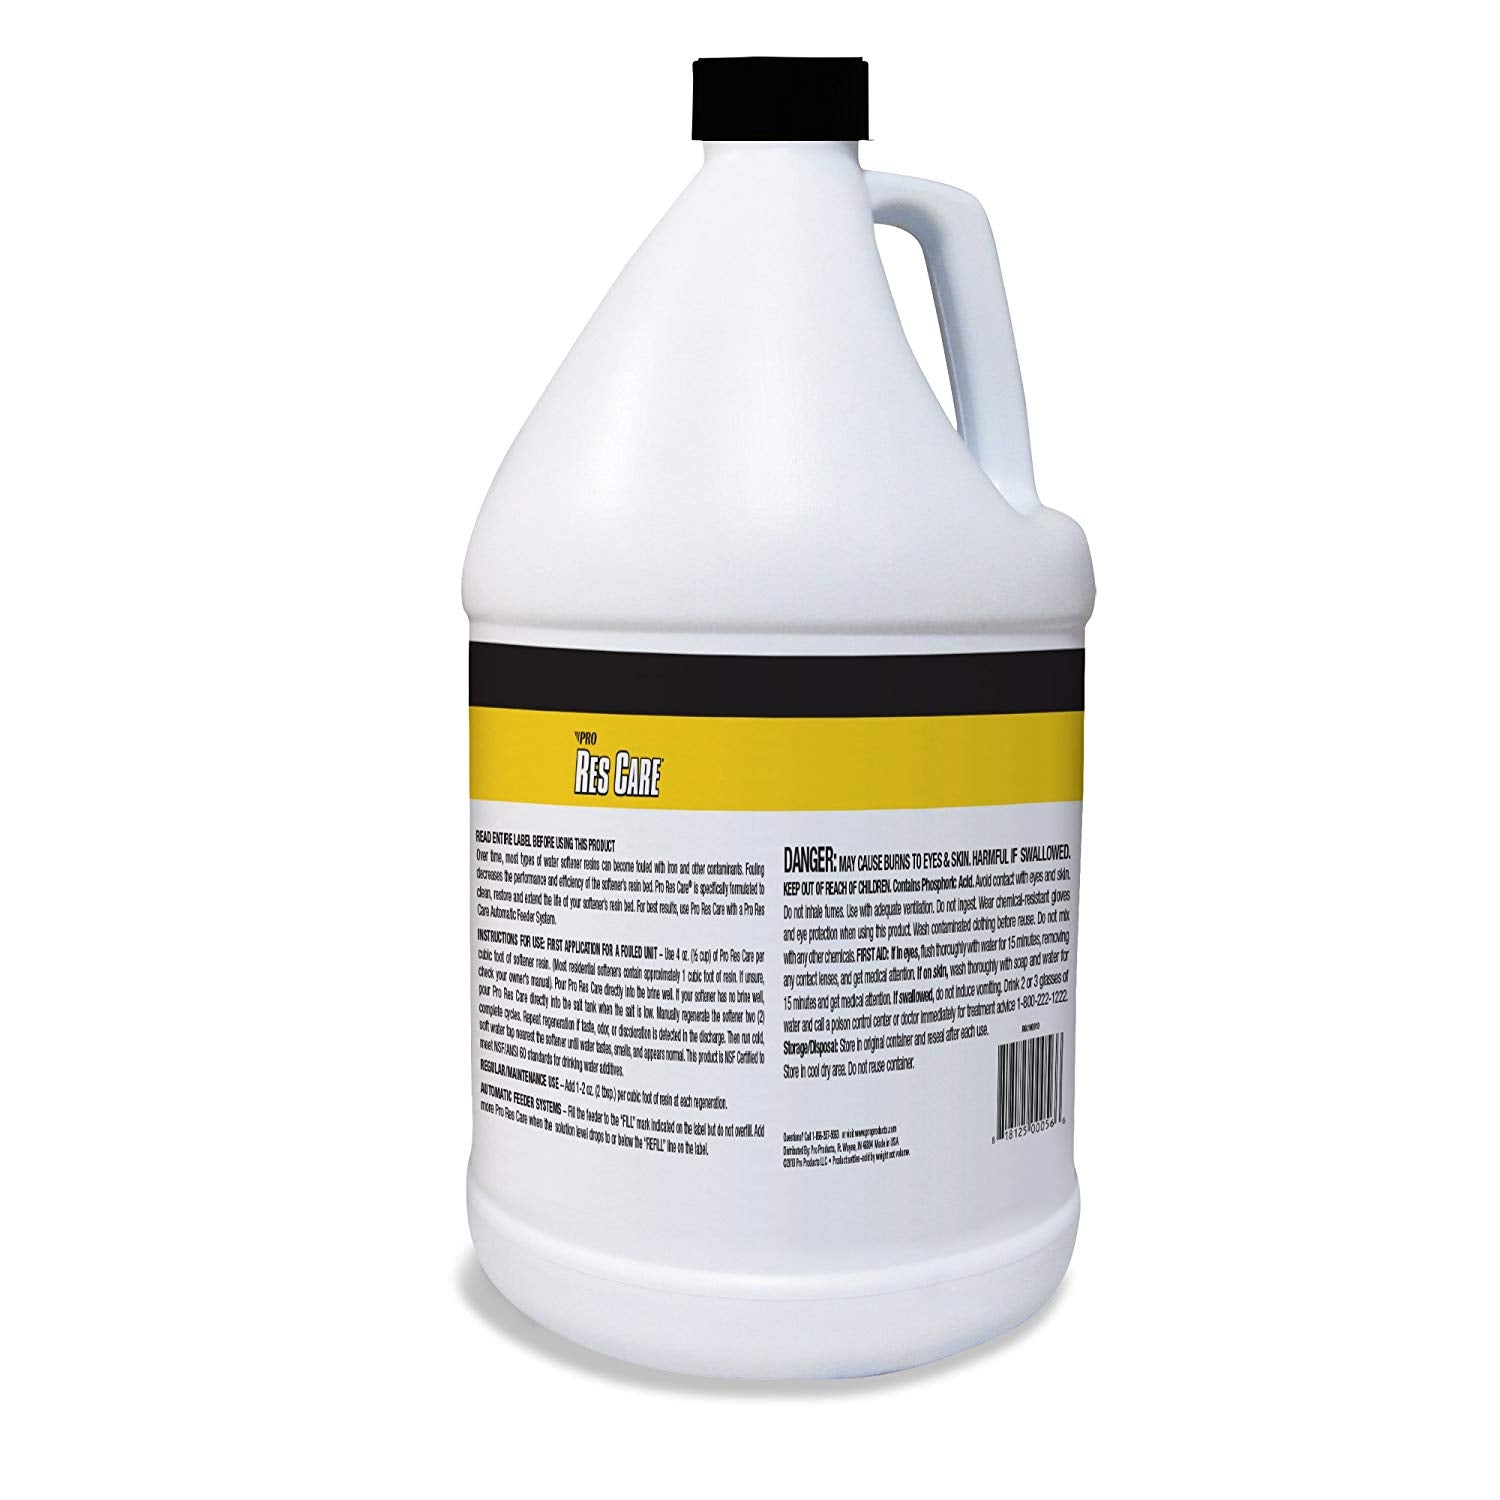 Pro Products Res Care Liquid Resin Cleaning Solution (1 Gallon